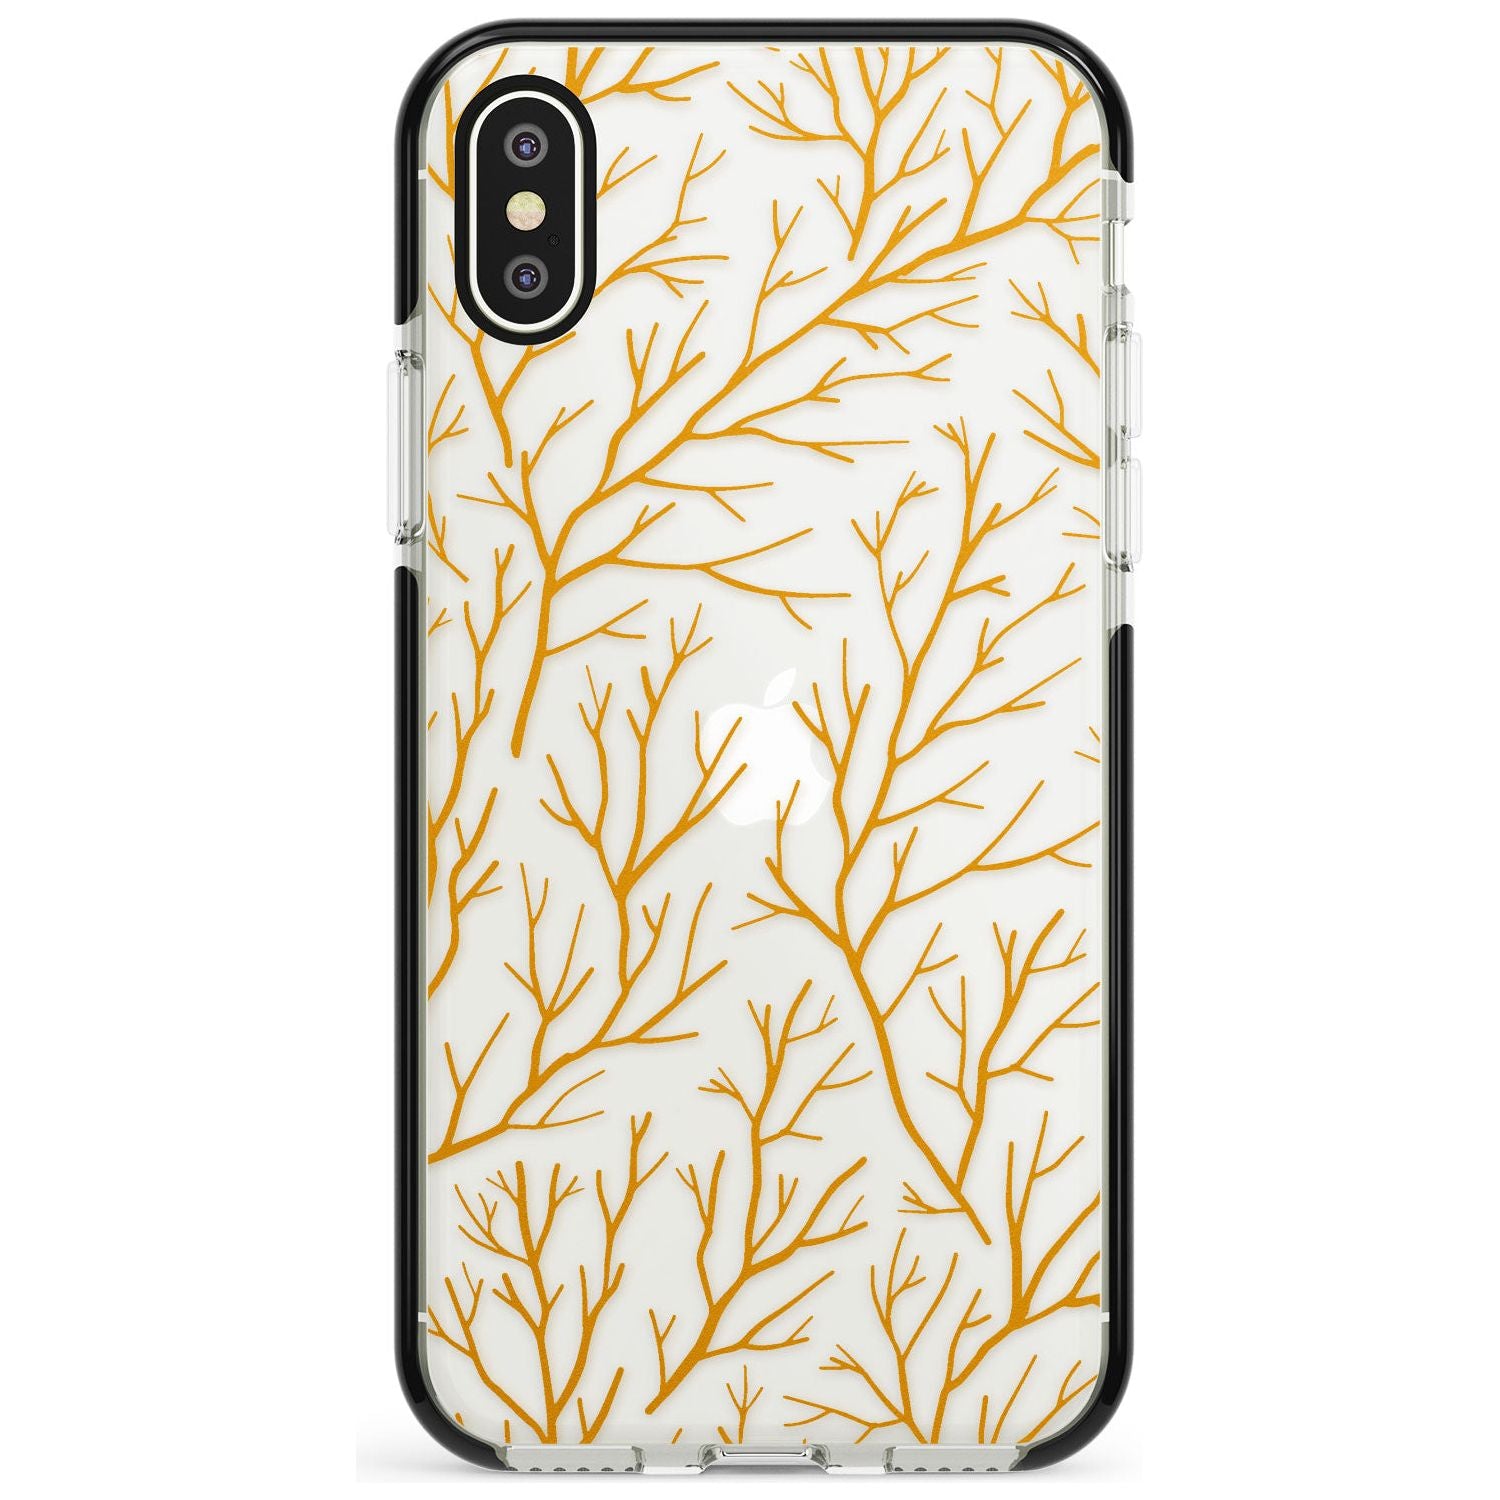 Personalised Bramble Branches Pattern Black Impact Phone Case for iPhone X XS Max XR